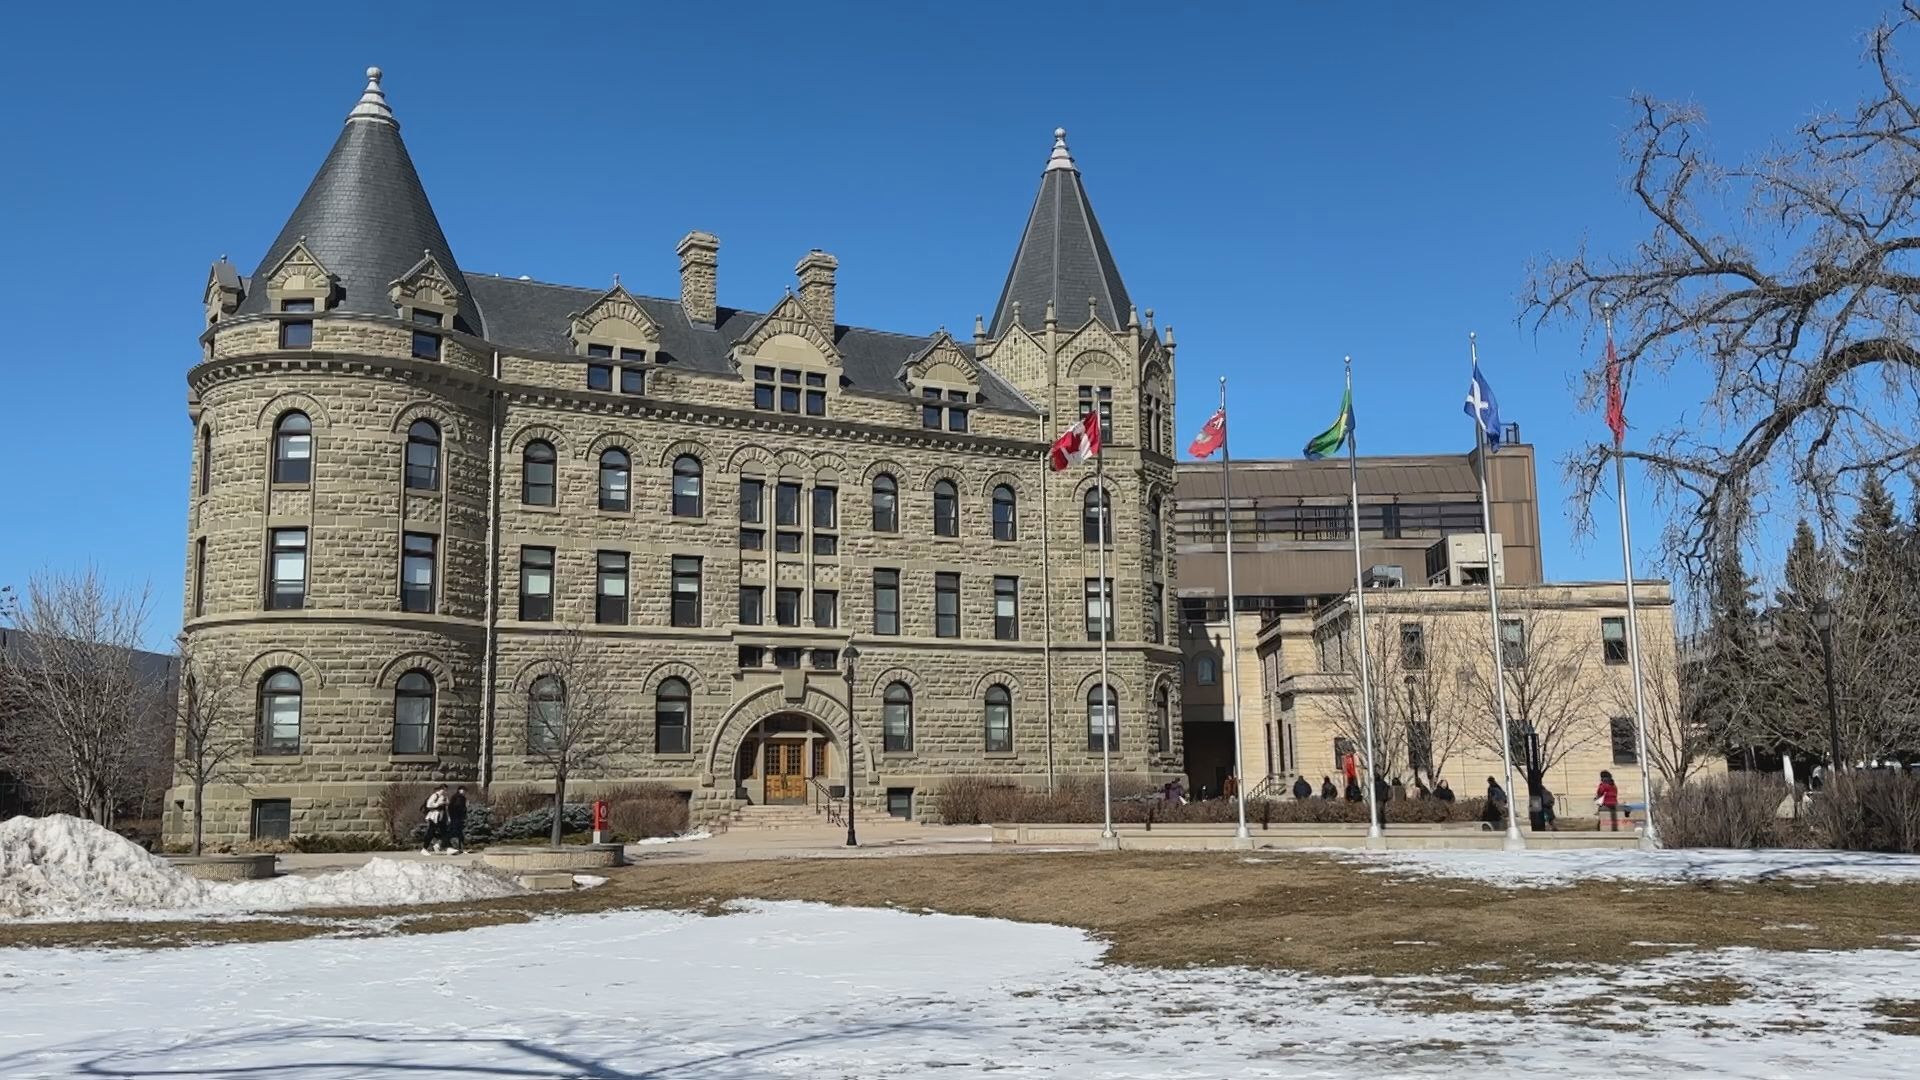 The University of Winnipeg extends term due to cyber incident